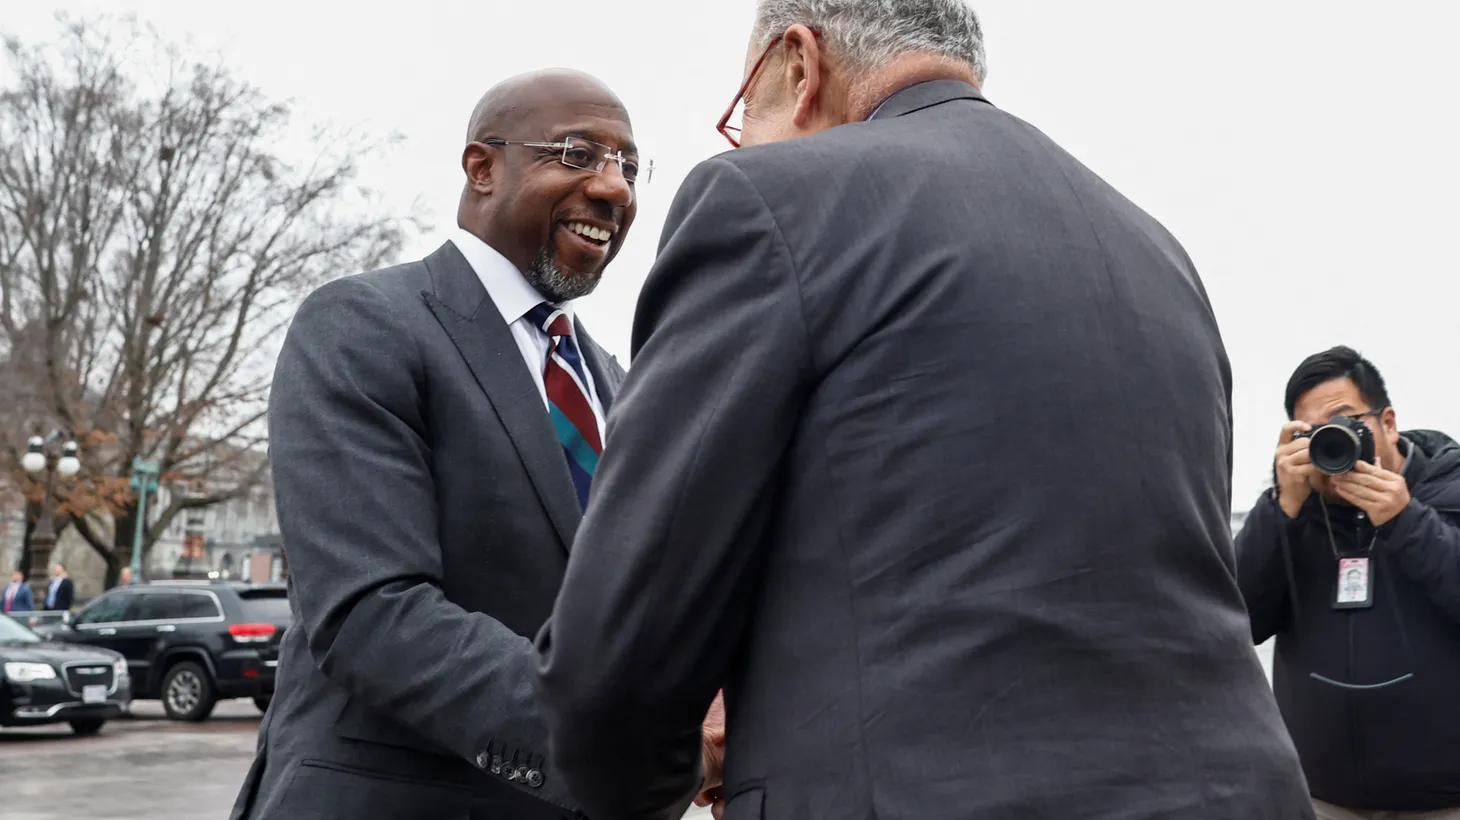 U.S. Senator Raphael Warnock (D-GA) is greeted by Senate Majority Leader Chuck Schumer (D-NY) at the Senate steps of the U.S. Capitol on Capitol Hill as Warnock returns to the Senate one day after defeating Republican challenger Herschel Walker in a Georgia runoff, in Washington, U.S., December 7, 2022.